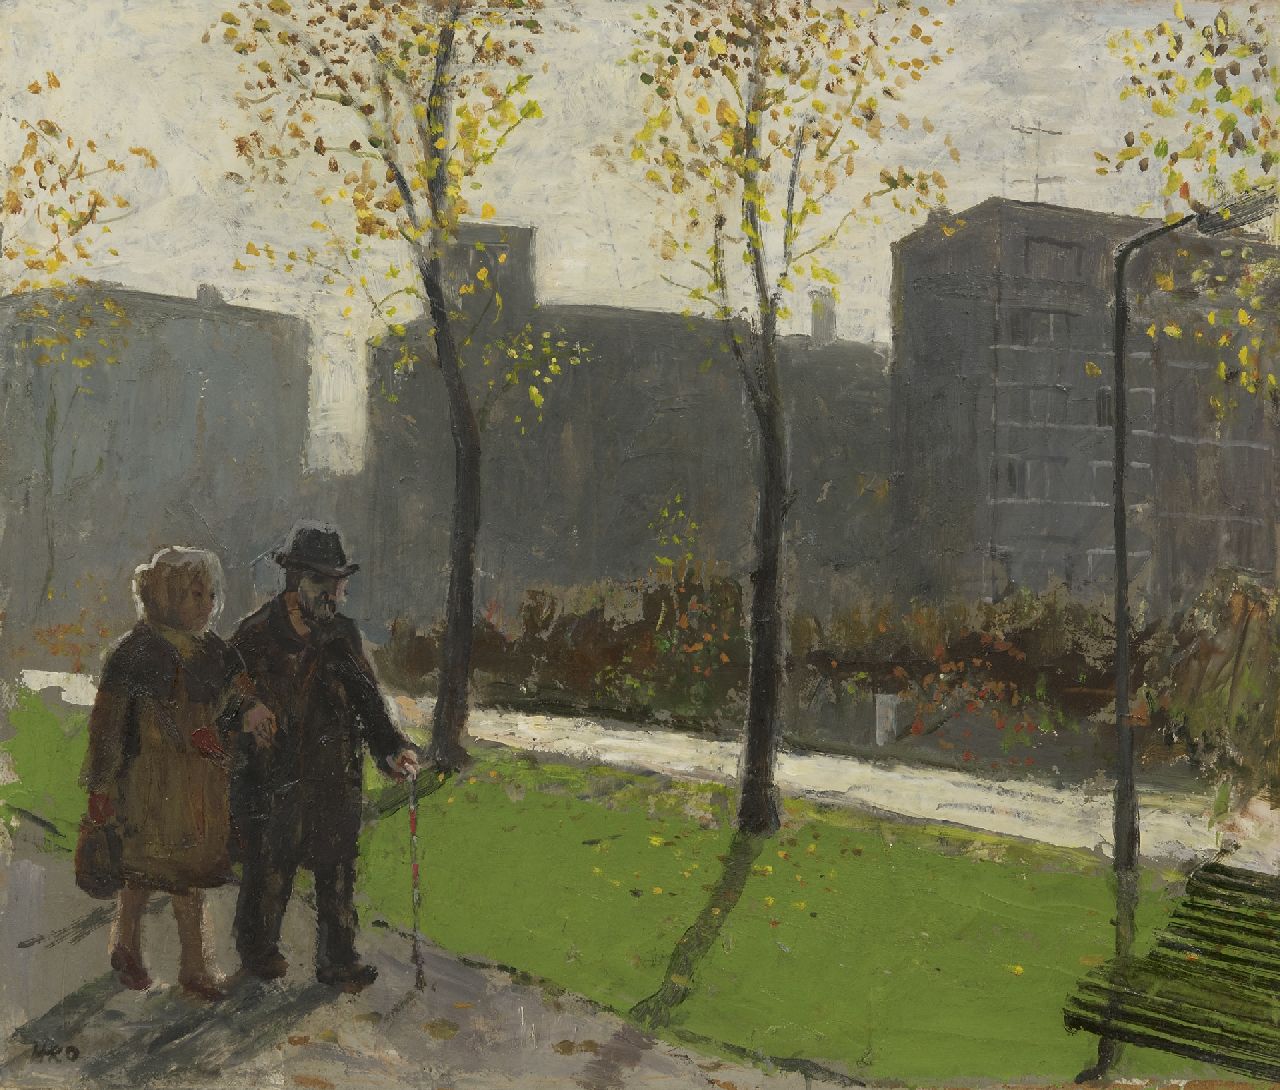 Kamerlingh Onnes H.H.  | 'Harm' Henrick Kamerlingh Onnes | Paintings offered for sale | Walking in the park, oil on board 35.7 x 42.1 cm, signed l.l. and on the reverse with monogram and dated on the reverse 1965